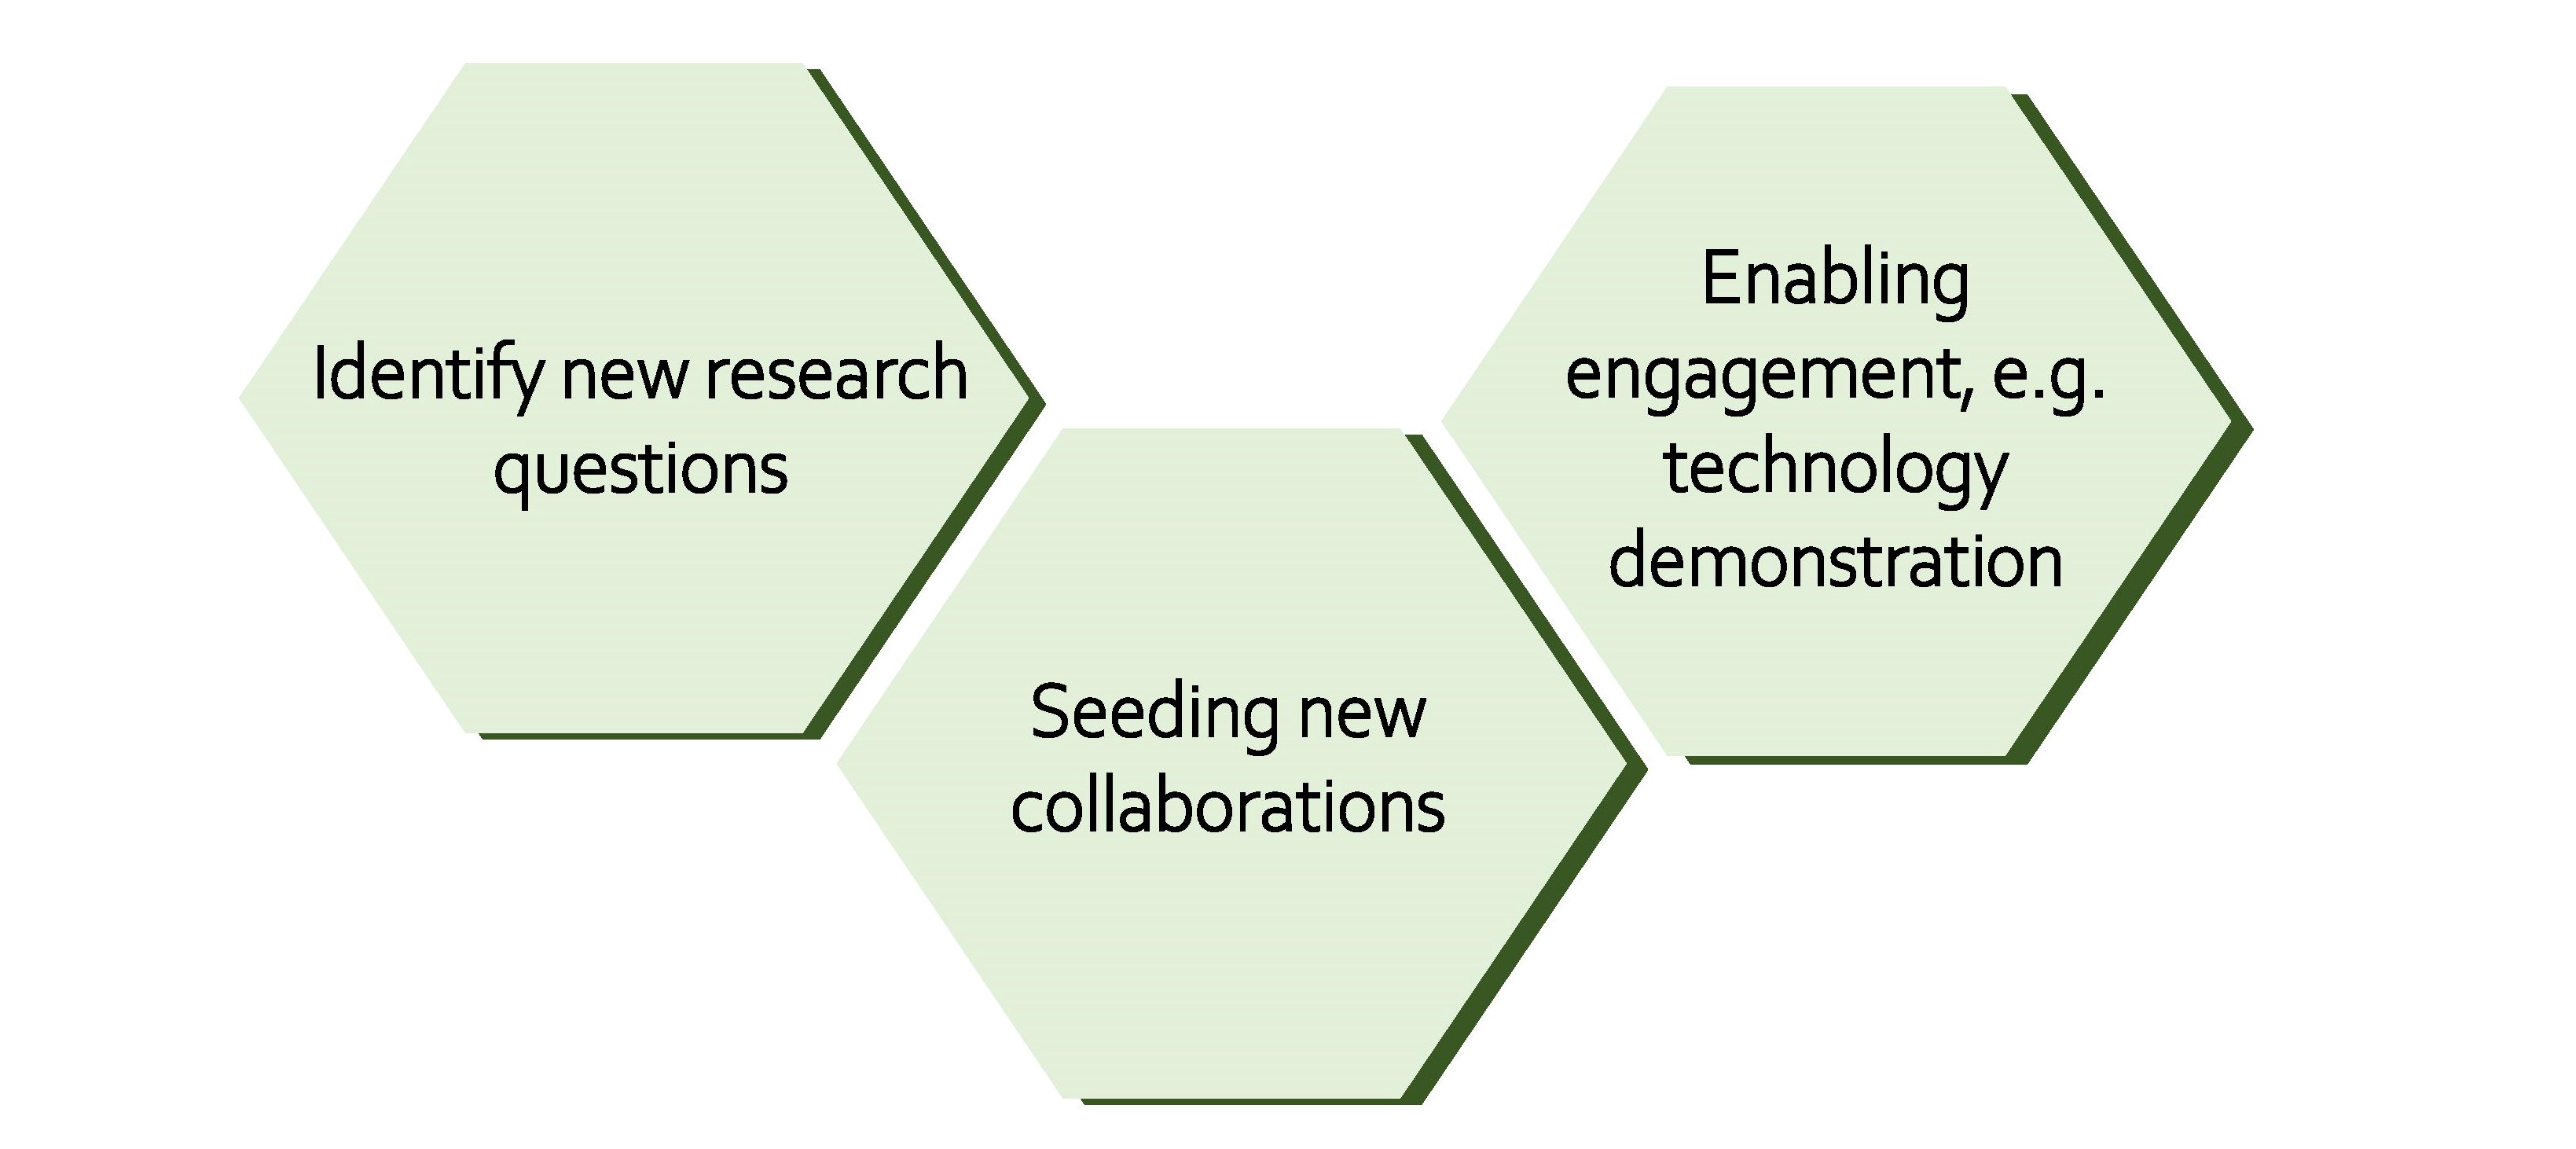 Identify new research questions; Seeding new collaborations; Enabling engagement, e.g. technology demonstration